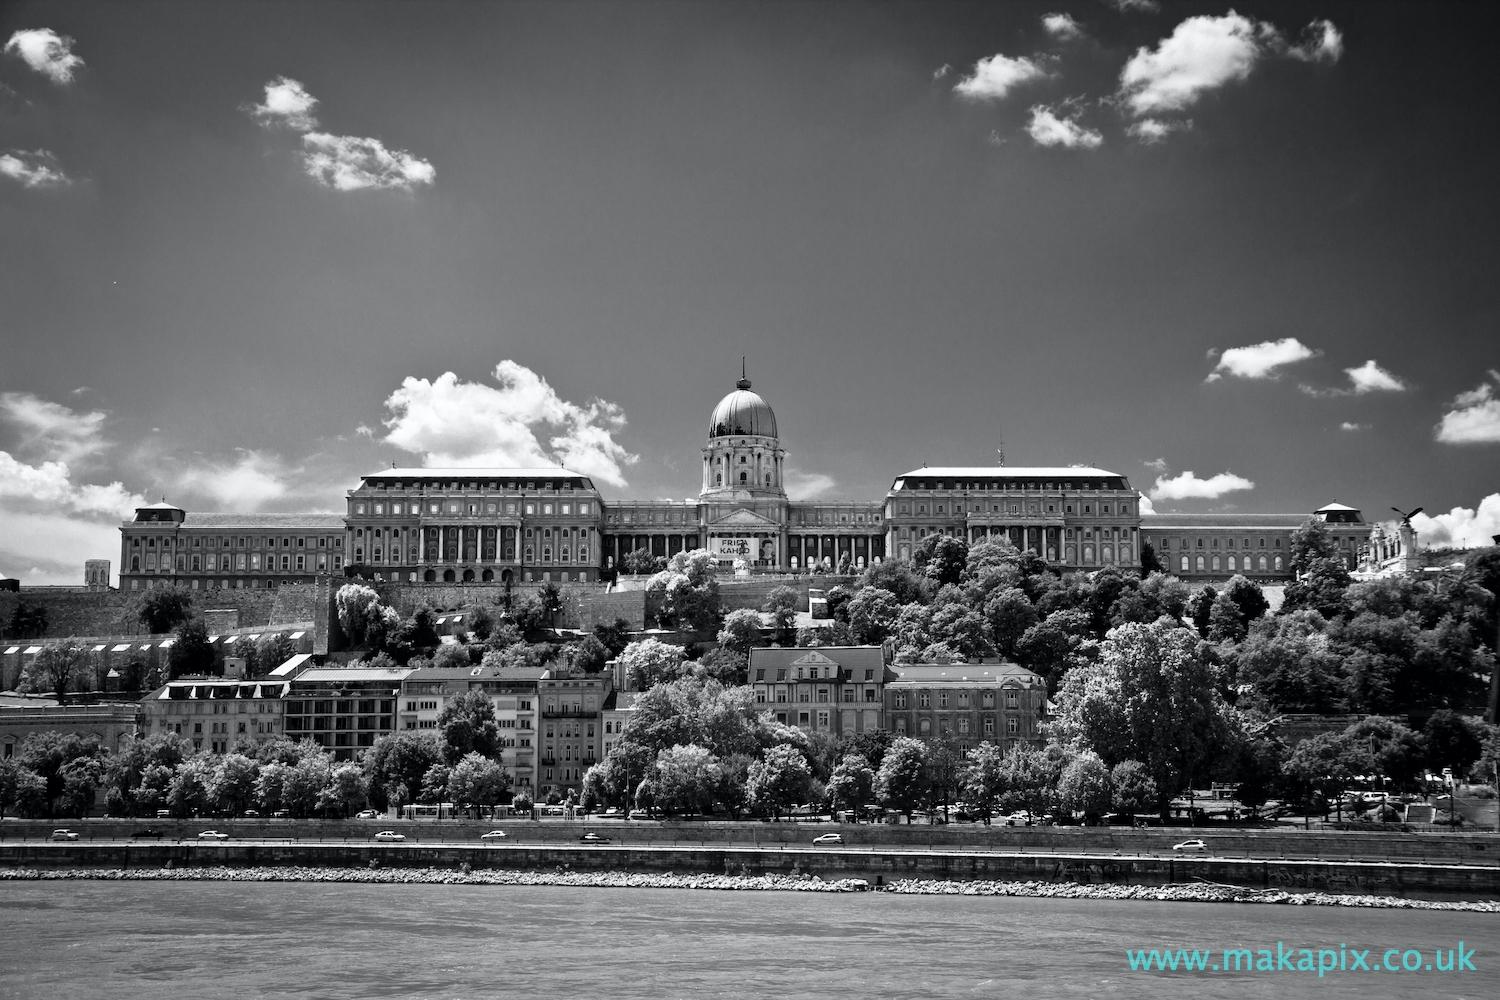 Budapest Castle in black and white